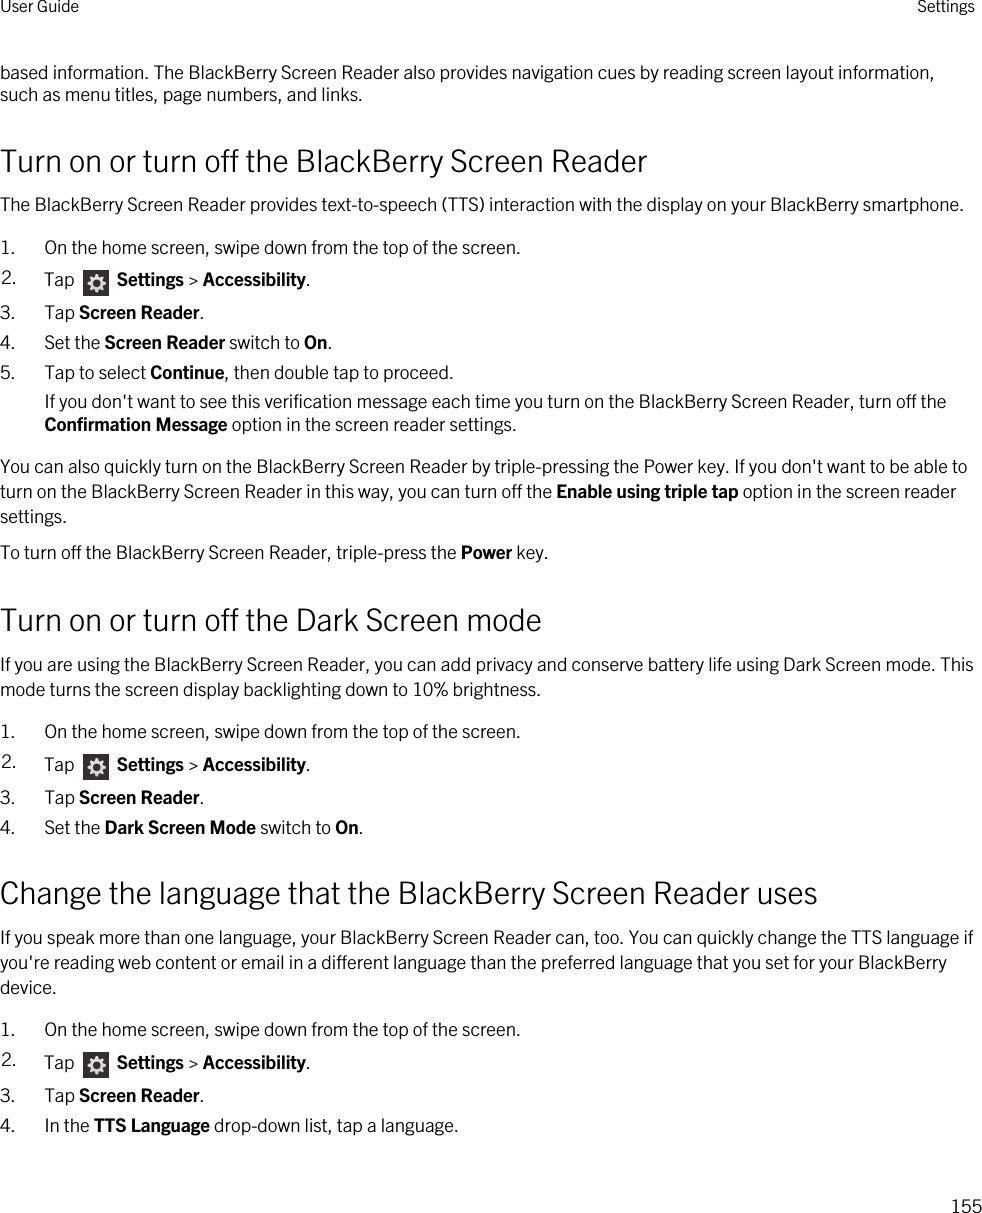 based information. The BlackBerry Screen Reader also provides navigation cues by reading screen layout information, such as menu titles, page numbers, and links.Turn on or turn off the BlackBerry Screen ReaderThe BlackBerry Screen Reader provides text-to-speech (TTS) interaction with the display on your BlackBerry smartphone.1. On the home screen, swipe down from the top of the screen.2. Tap   Settings &gt; Accessibility.3. Tap Screen Reader.4. Set the Screen Reader switch to On.5. Tap to select Continue, then double tap to proceed.If you don&apos;t want to see this verification message each time you turn on the BlackBerry Screen Reader, turn off the Confirmation Message option in the screen reader settings.You can also quickly turn on the BlackBerry Screen Reader by triple-pressing the Power key. If you don&apos;t want to be able to turn on the BlackBerry Screen Reader in this way, you can turn off the Enable using triple tap option in the screen reader settings.To turn off the BlackBerry Screen Reader, triple-press the Power key.Turn on or turn off the Dark Screen modeIf you are using the BlackBerry Screen Reader, you can add privacy and conserve battery life using Dark Screen mode. This mode turns the screen display backlighting down to 10% brightness.1. On the home screen, swipe down from the top of the screen.2. Tap   Settings &gt; Accessibility.3. Tap Screen Reader.4. Set the Dark Screen Mode switch to On.Change the language that the BlackBerry Screen Reader usesIf you speak more than one language, your BlackBerry Screen Reader can, too. You can quickly change the TTS language if you&apos;re reading web content or email in a different language than the preferred language that you set for your BlackBerry device.1. On the home screen, swipe down from the top of the screen.2. Tap   Settings &gt; Accessibility.3. Tap Screen Reader.4. In the TTS Language drop-down list, tap a language.User Guide Settings155